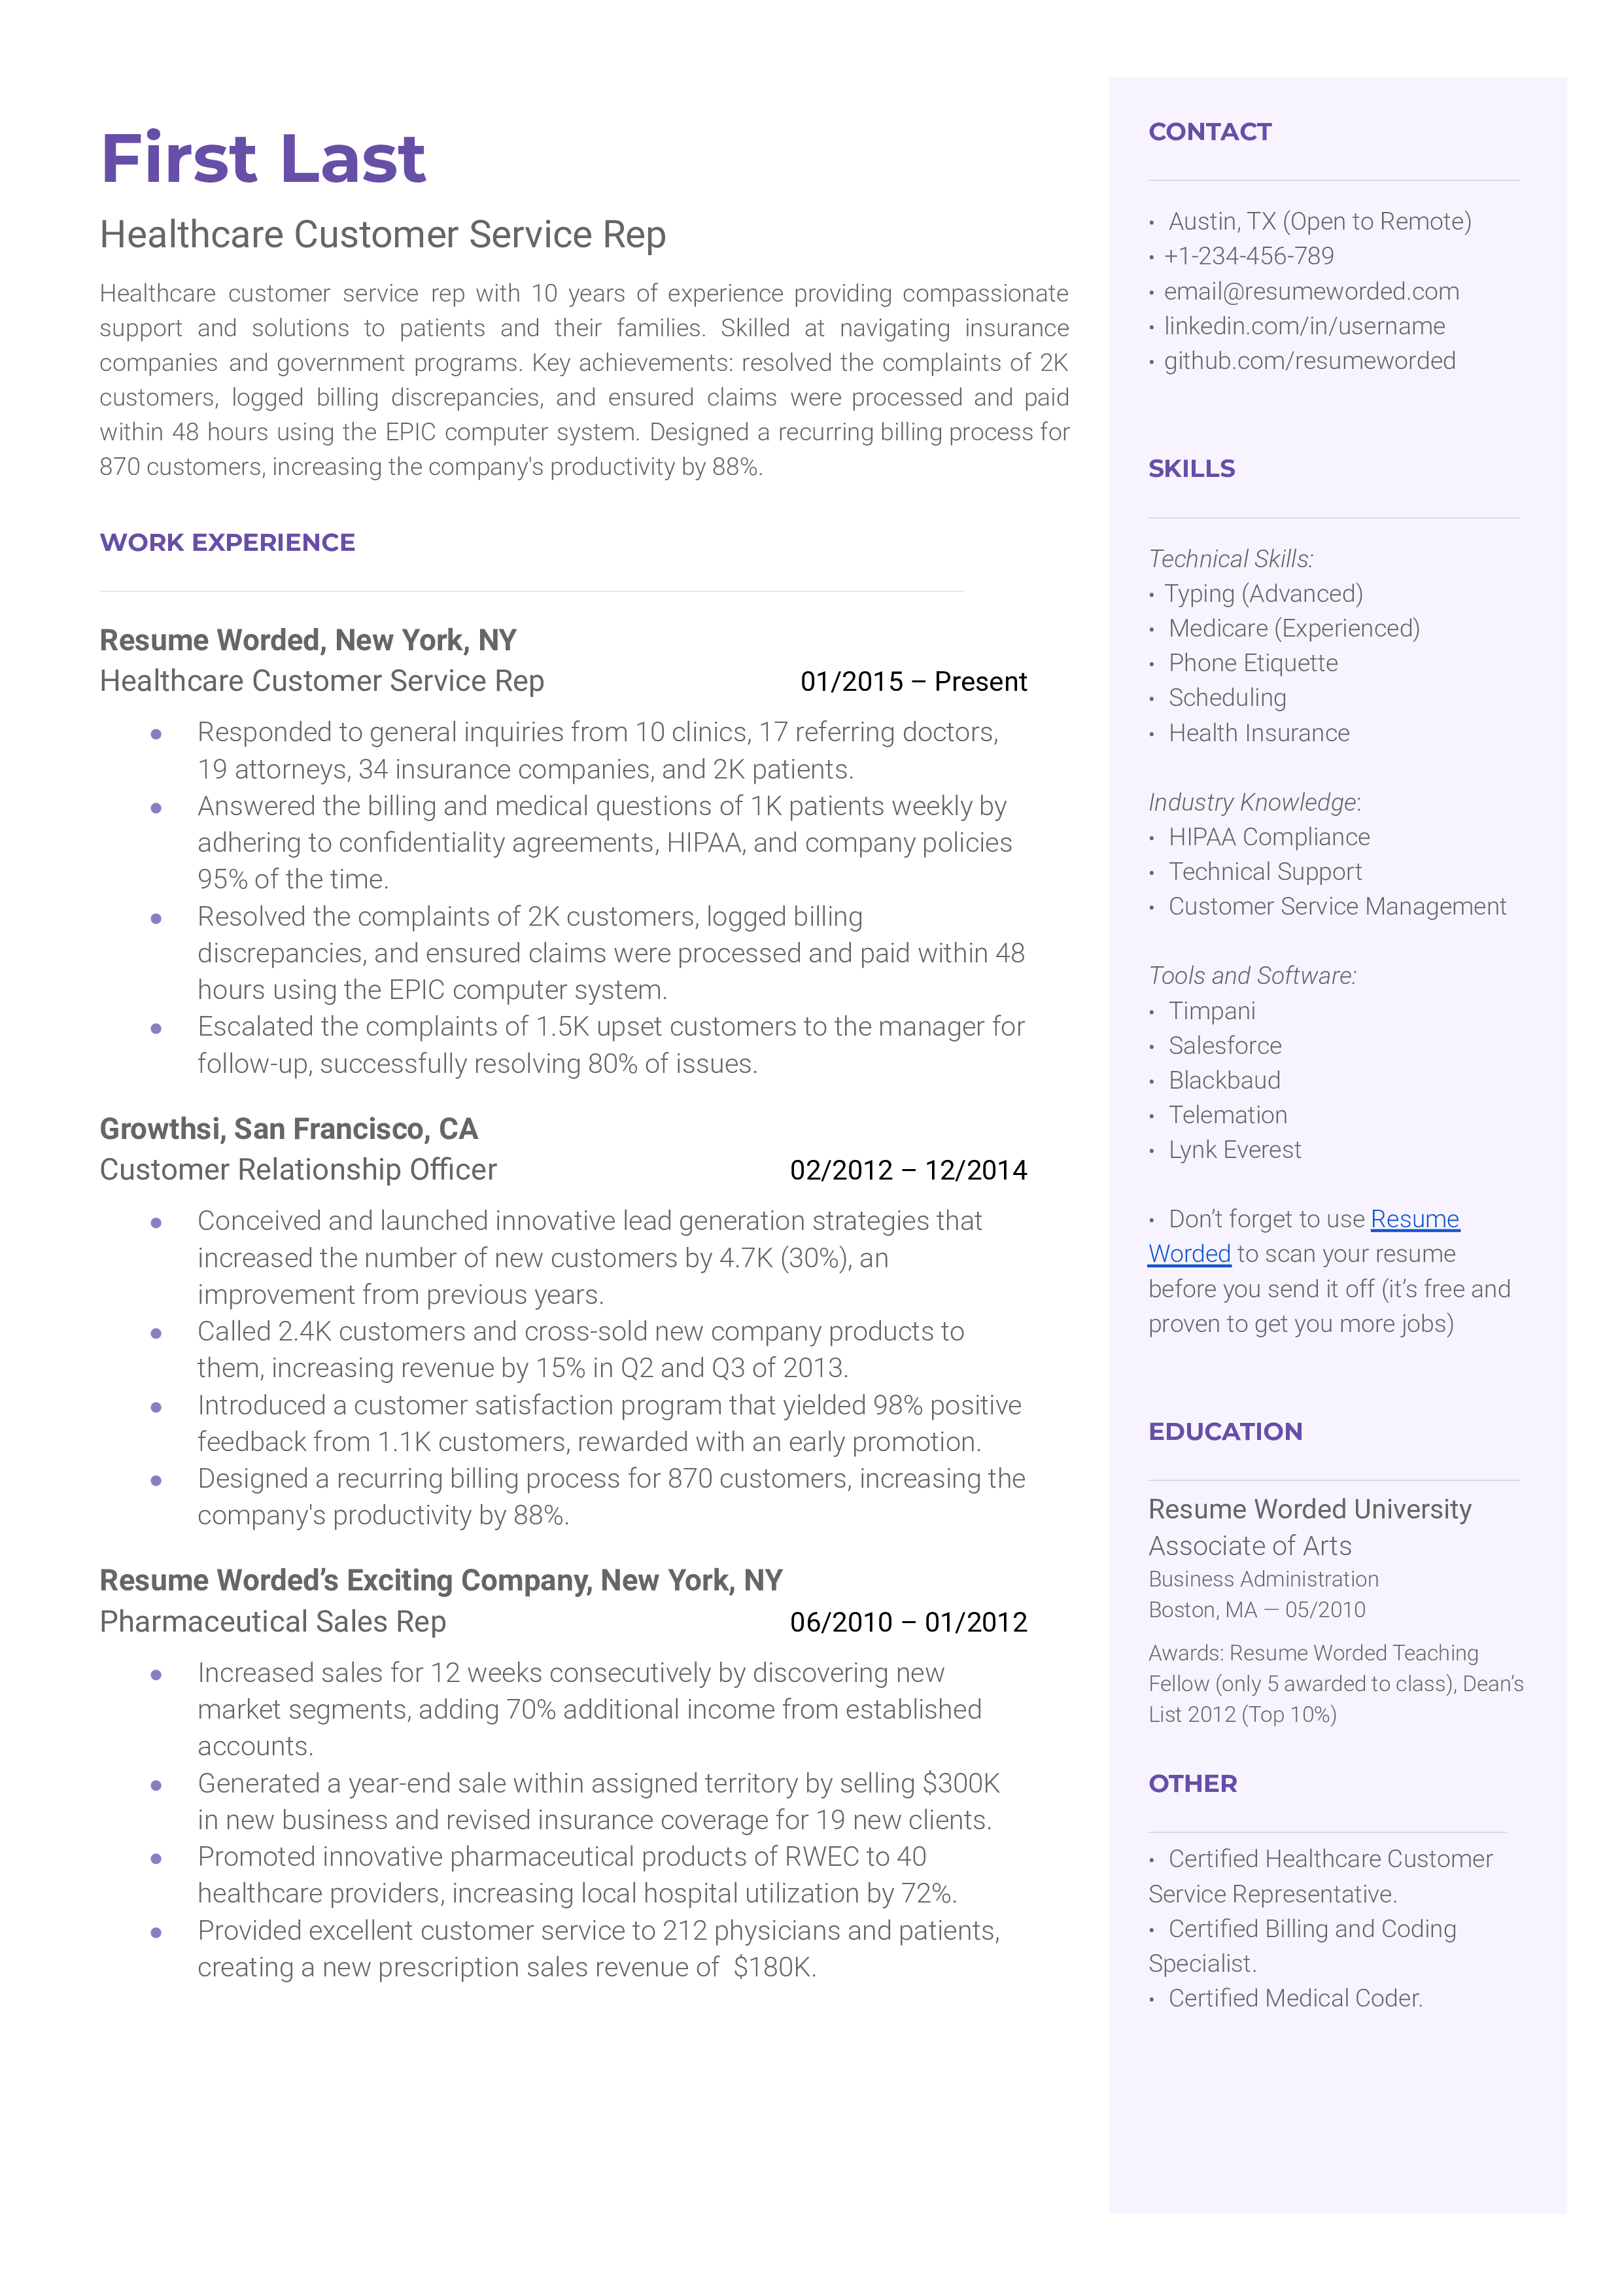 A well-crafted CV for a Healthcare Customer Service Rep position.